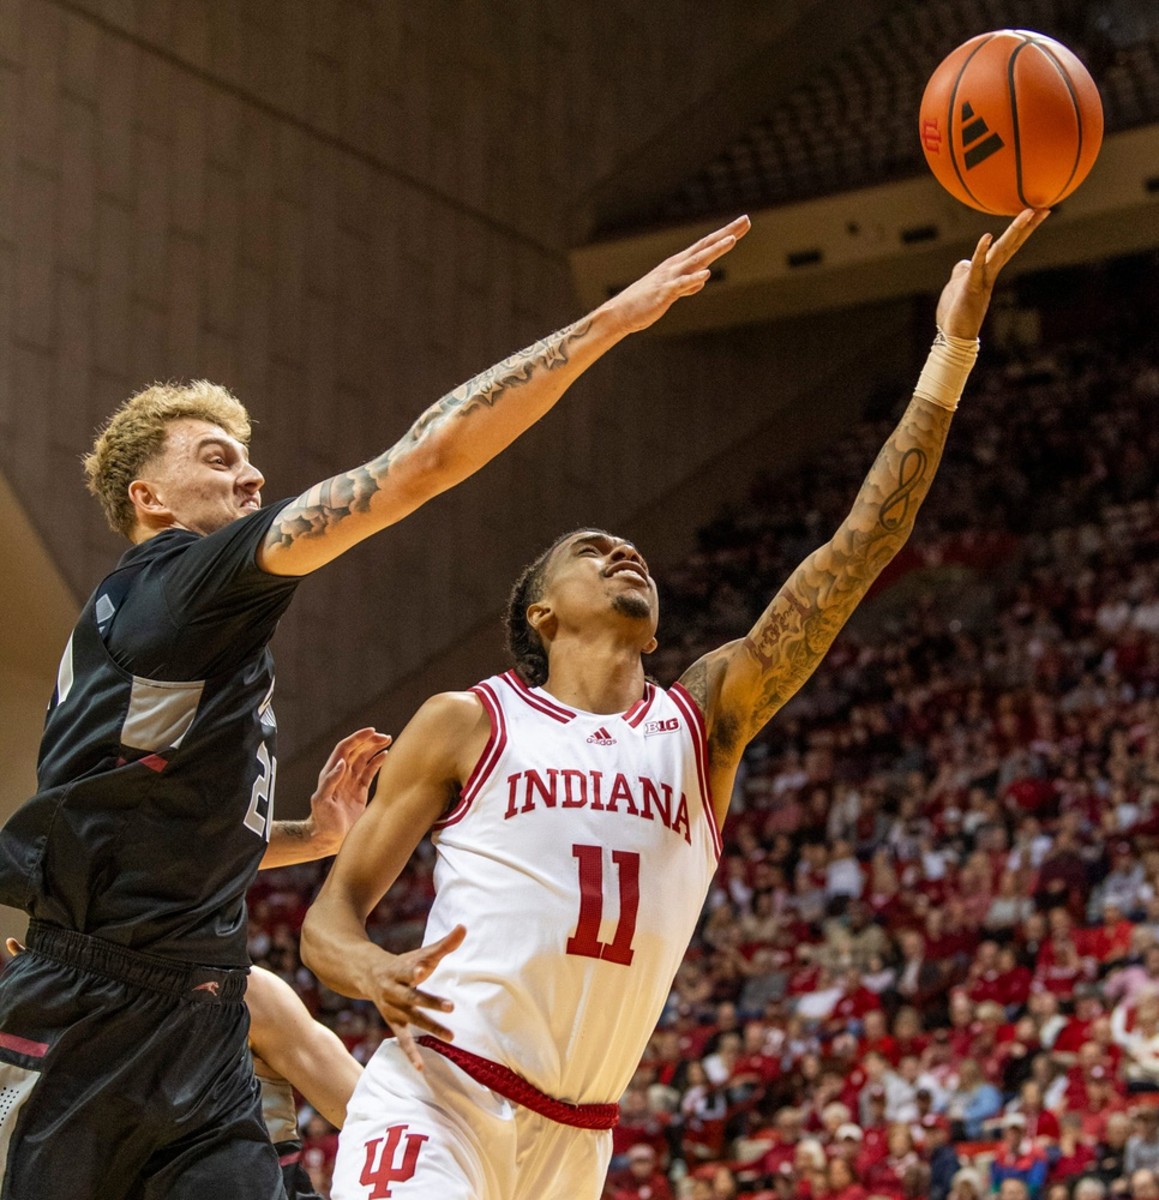 Indiana's CJ Gunn (11) shoots past University of Indianaplis' Julian Steindfeld (21) during the Indiana versus University of Indianapolis men's basketball game.